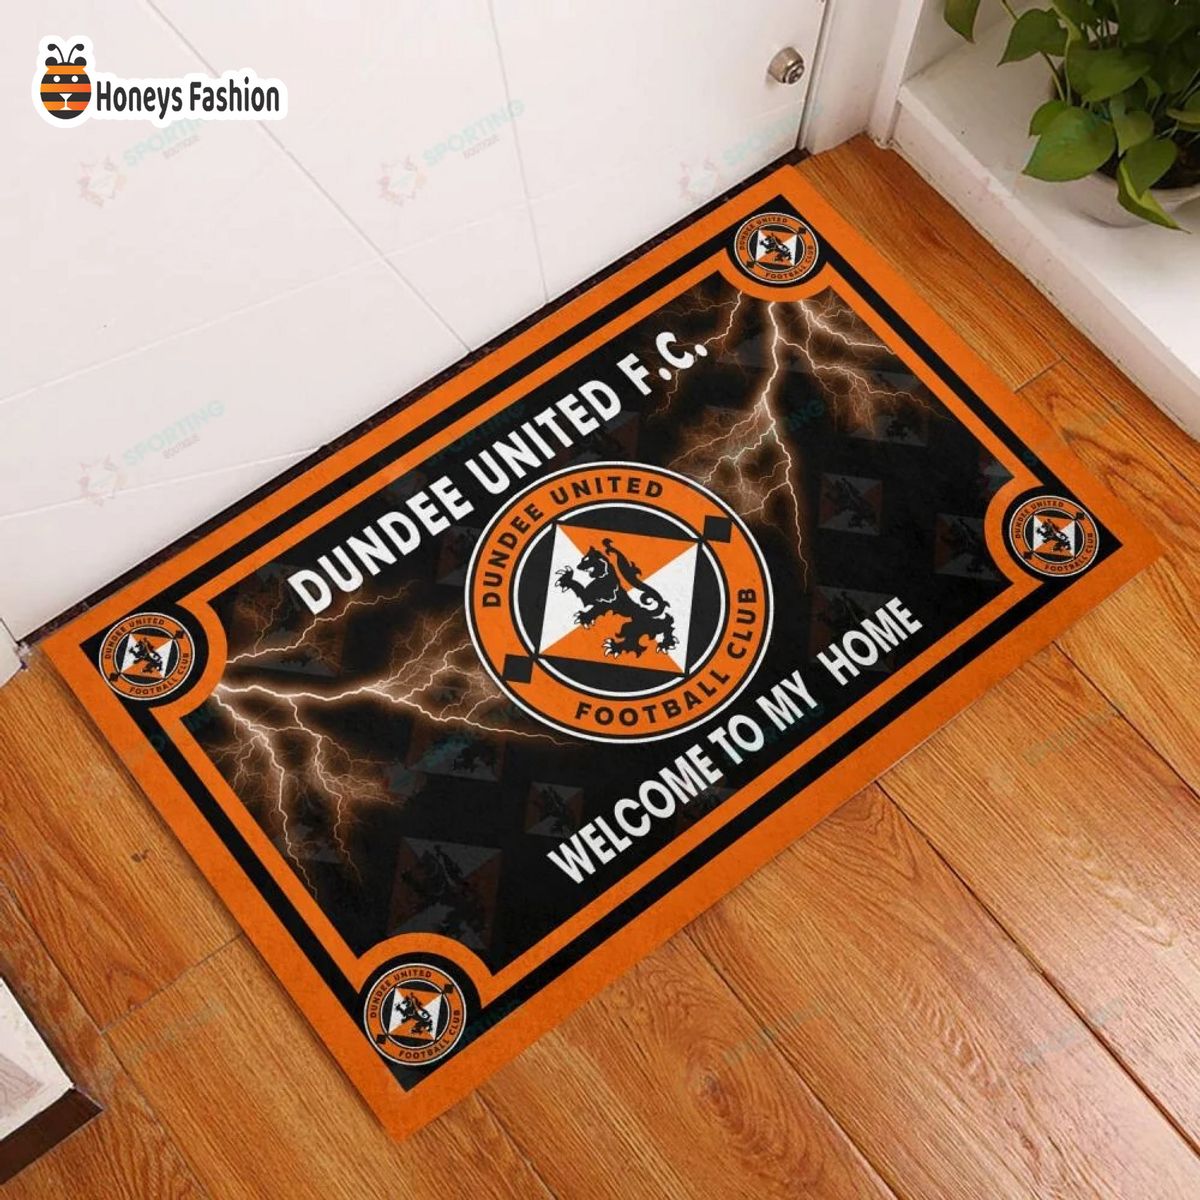 Dundee United F.C. welcome to my home doormat